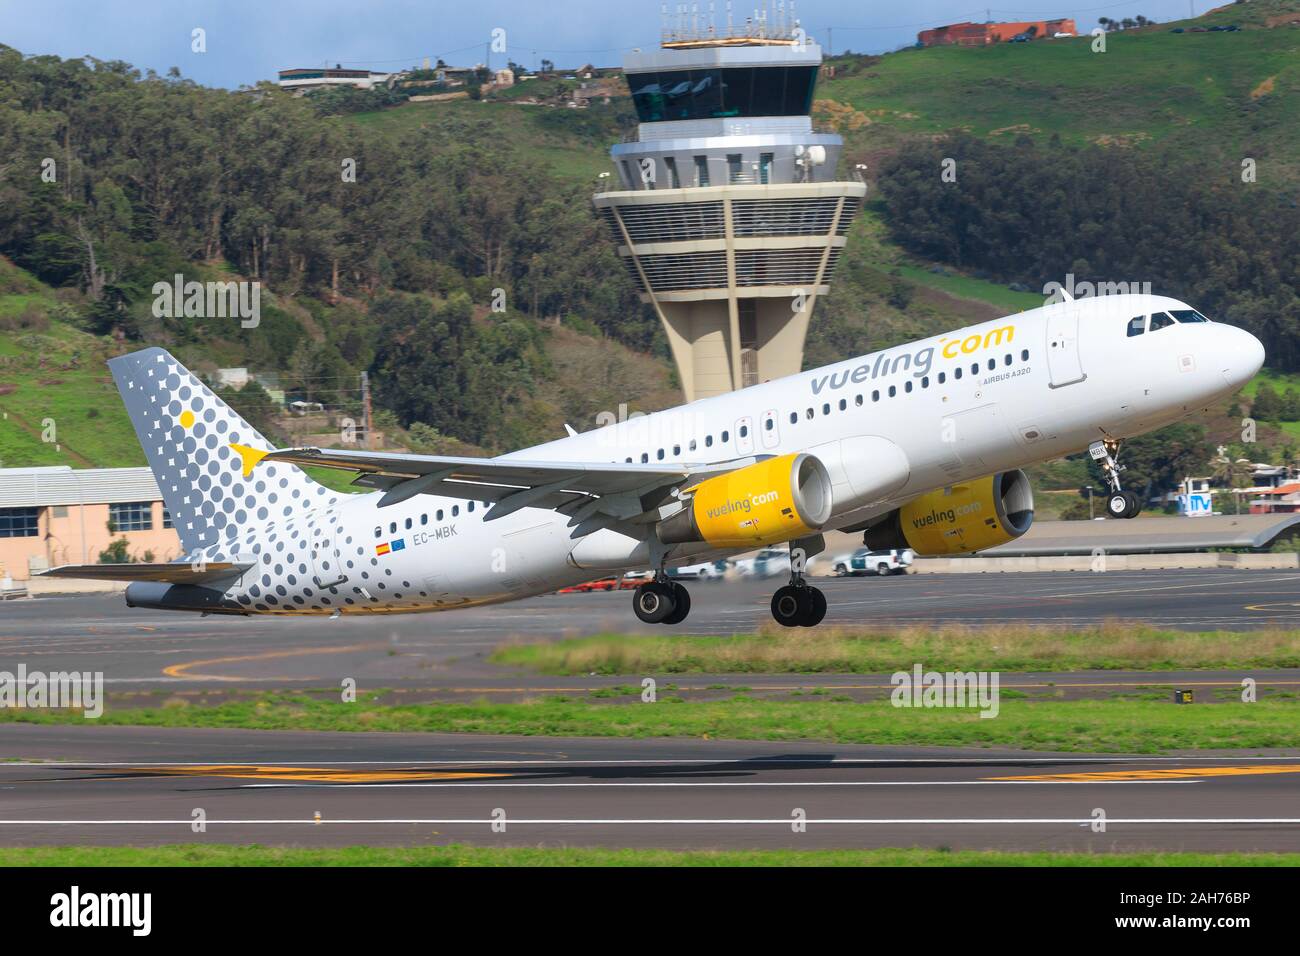 Tenerife, Canary Island, Spain - November 24th, 2019: Vueling A320 approaching Tenerife North airport Stock Photo